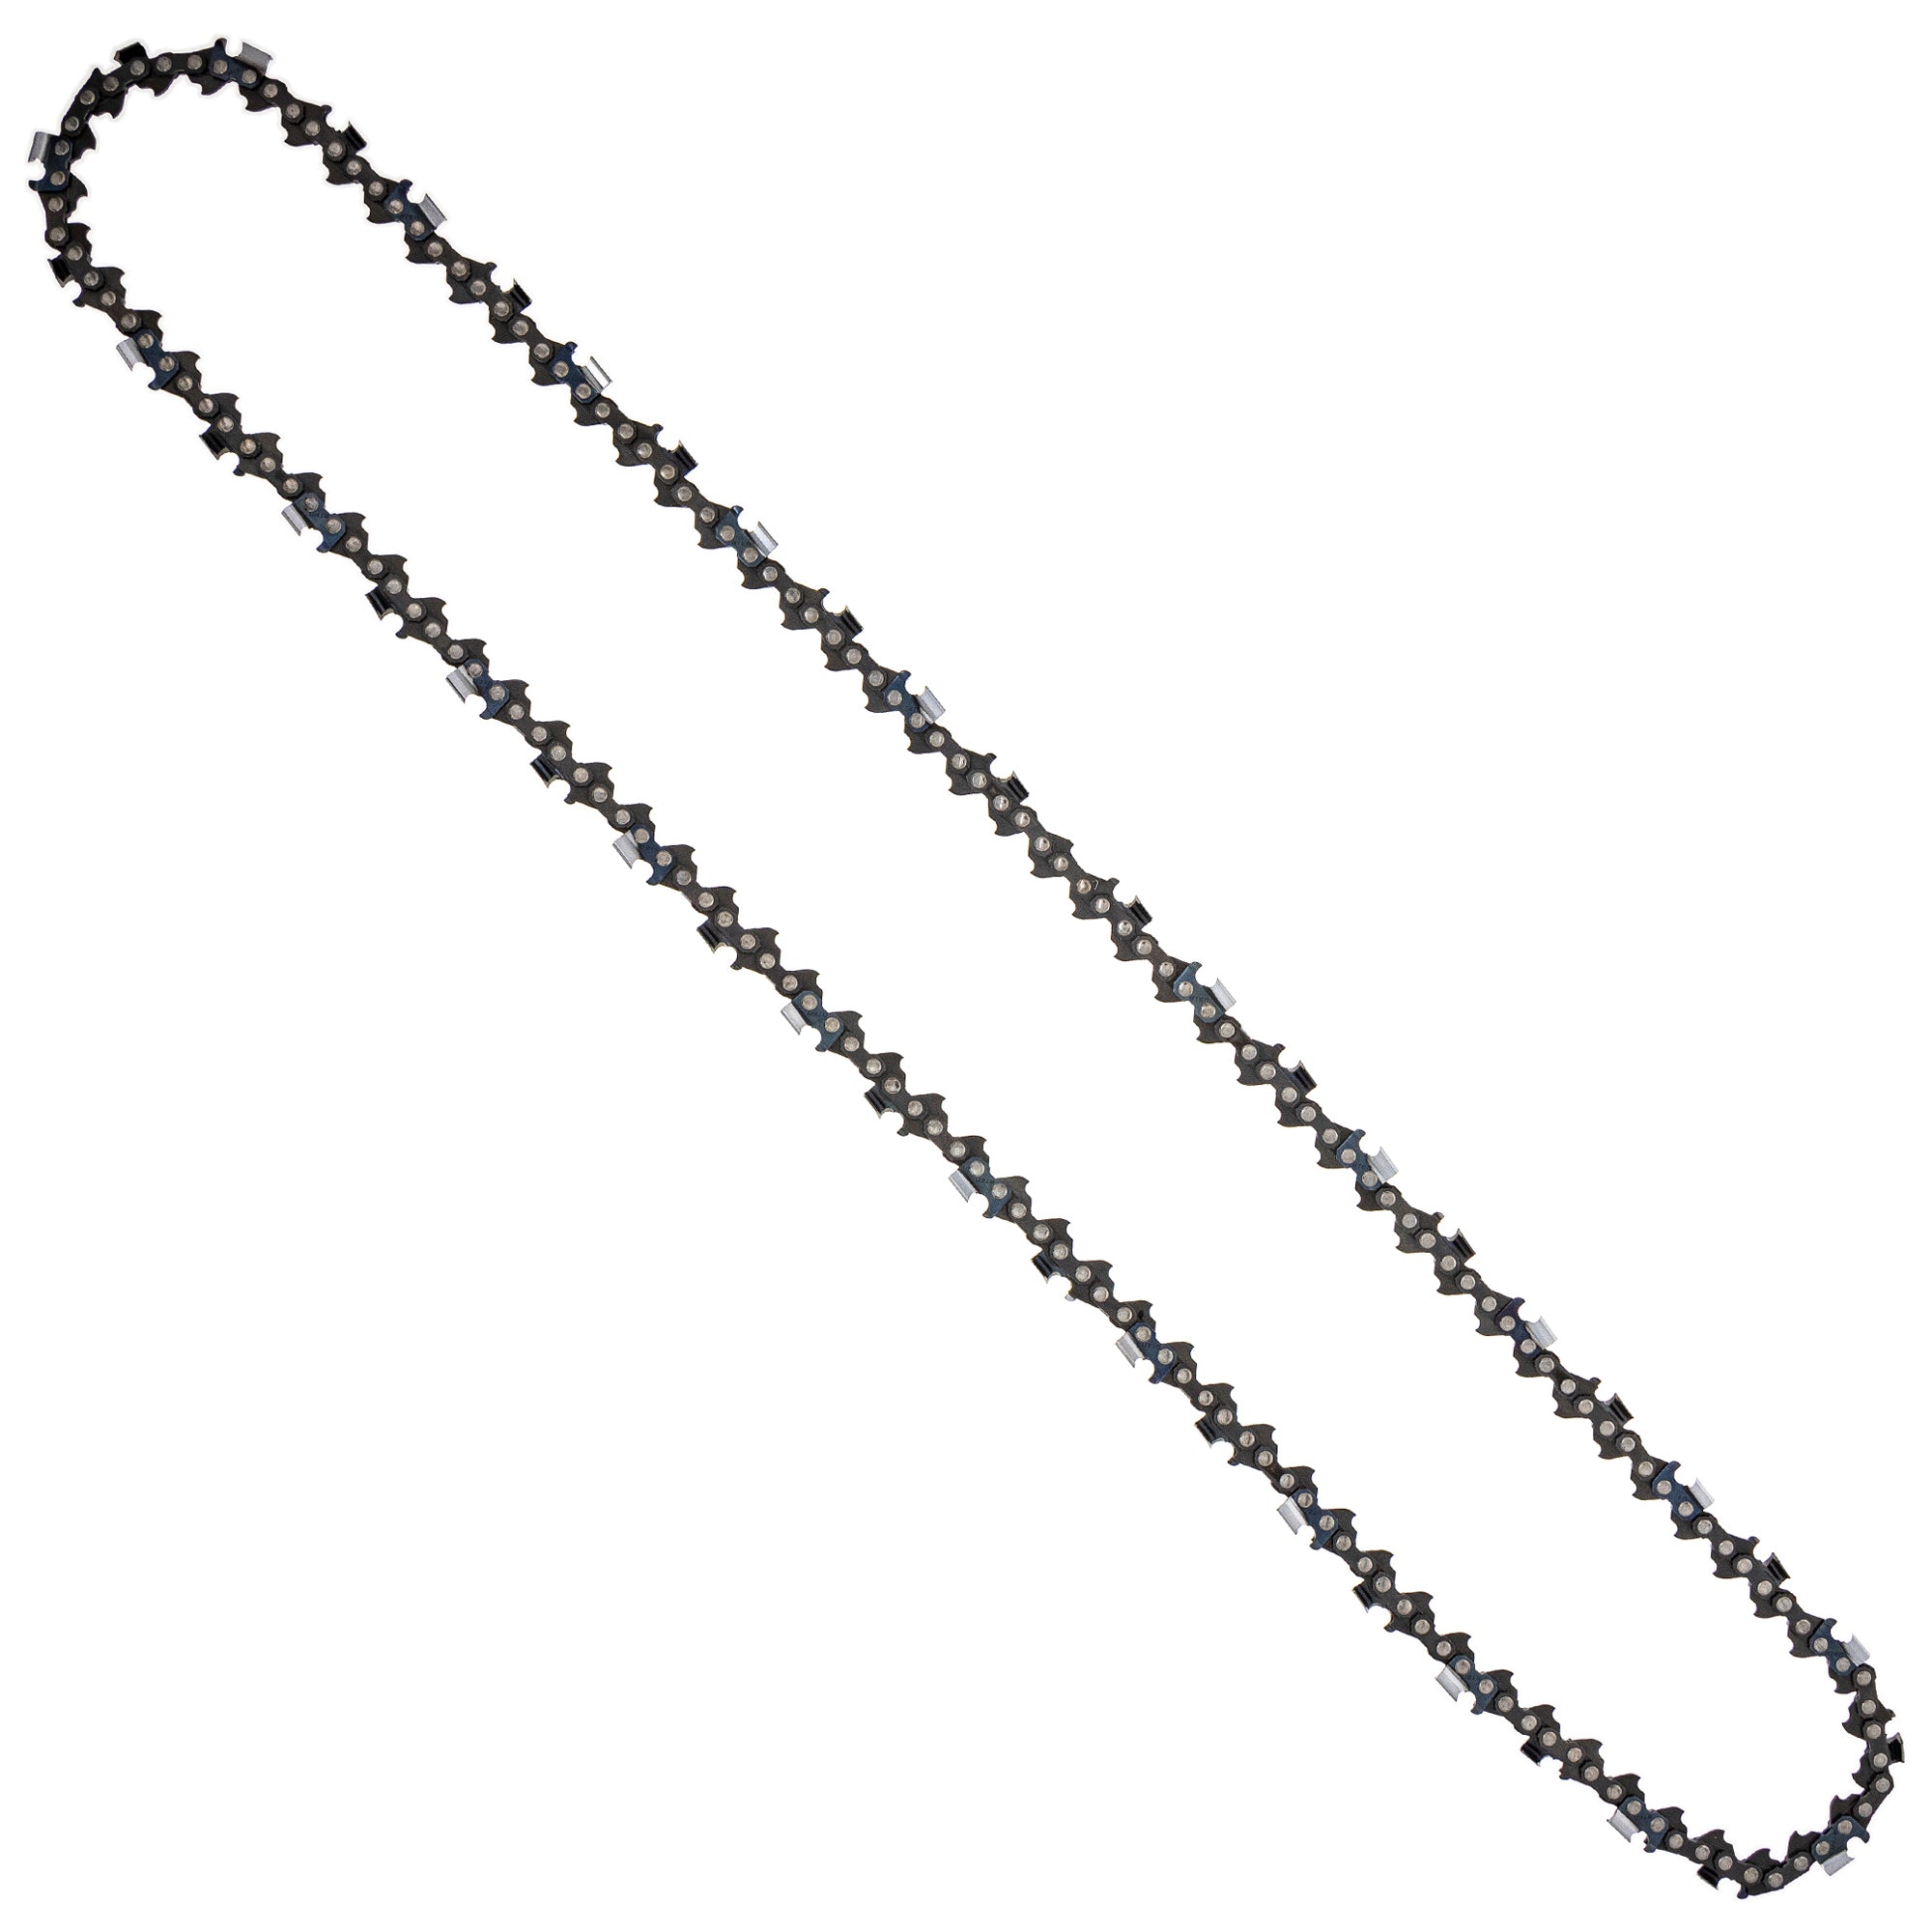 8TEN 810-CCC2352H Chain 4-Pack for zOTHER Oregon MS 066 064 056